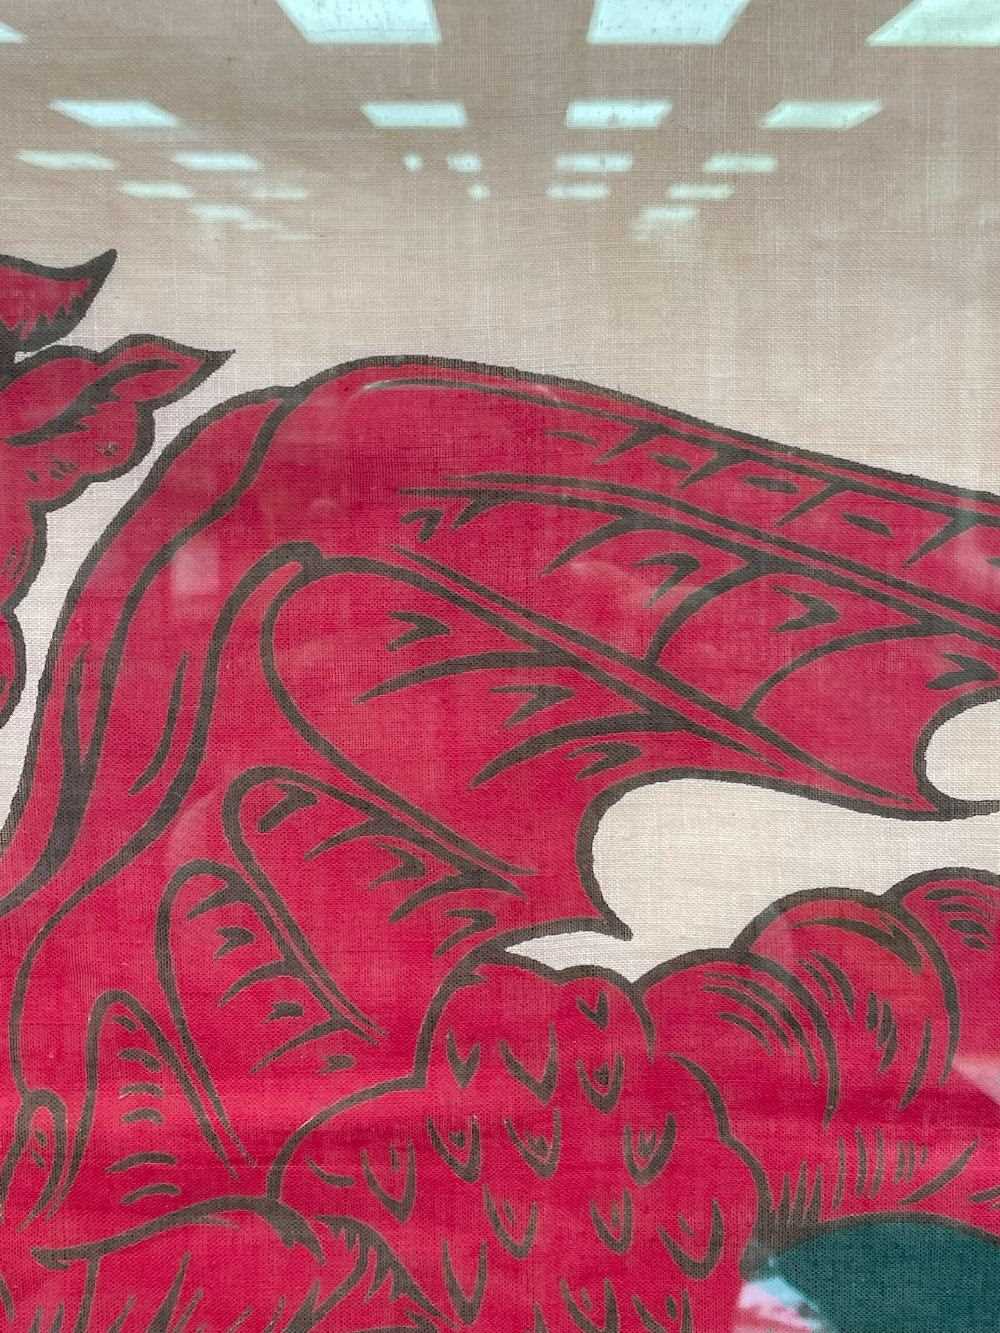 EARLY 20TH CENTURY WELSH FLAG (Y DDRAIG GOCH) with stitched edging and printed British made, 43 x - Image 11 of 21